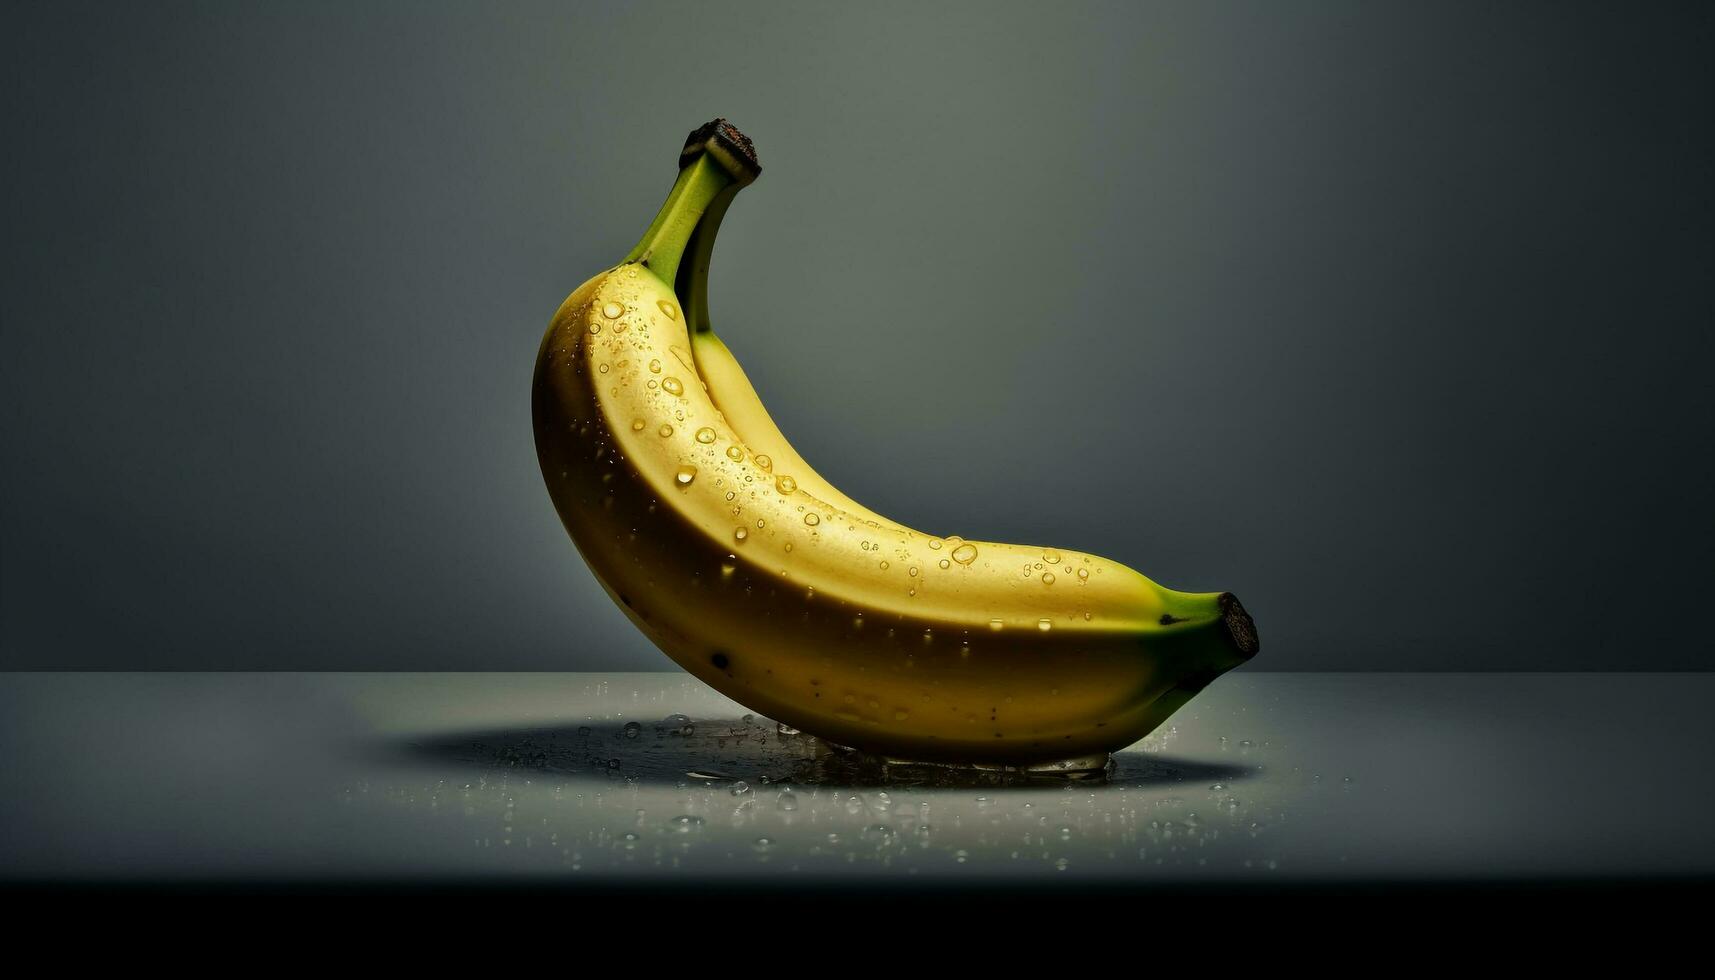 Juicy ripe banana, a healthy snack for vegetarian diets generated by AI photo